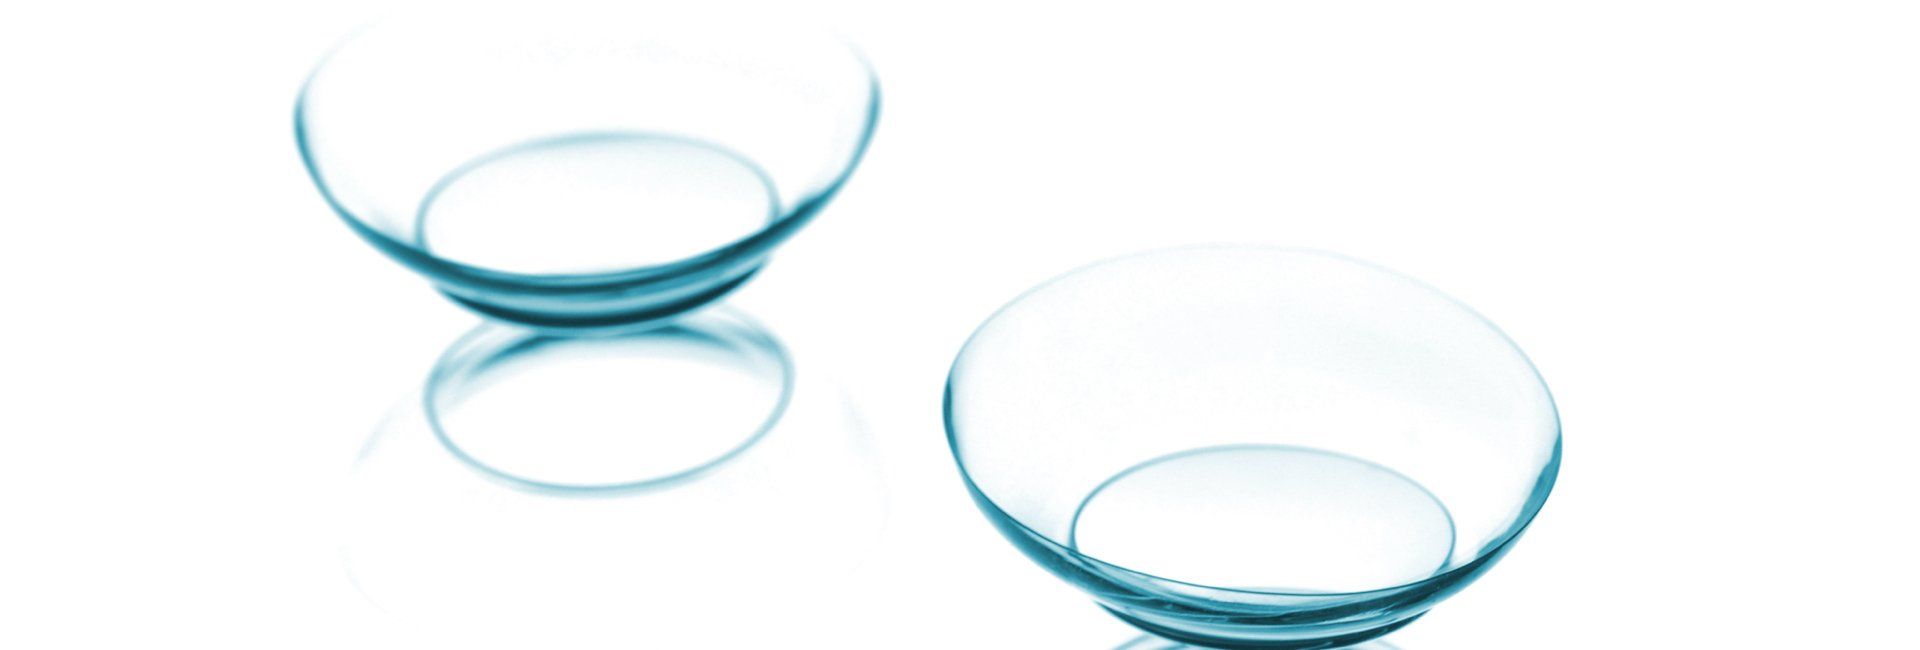 Pair of hybrid contact lenses